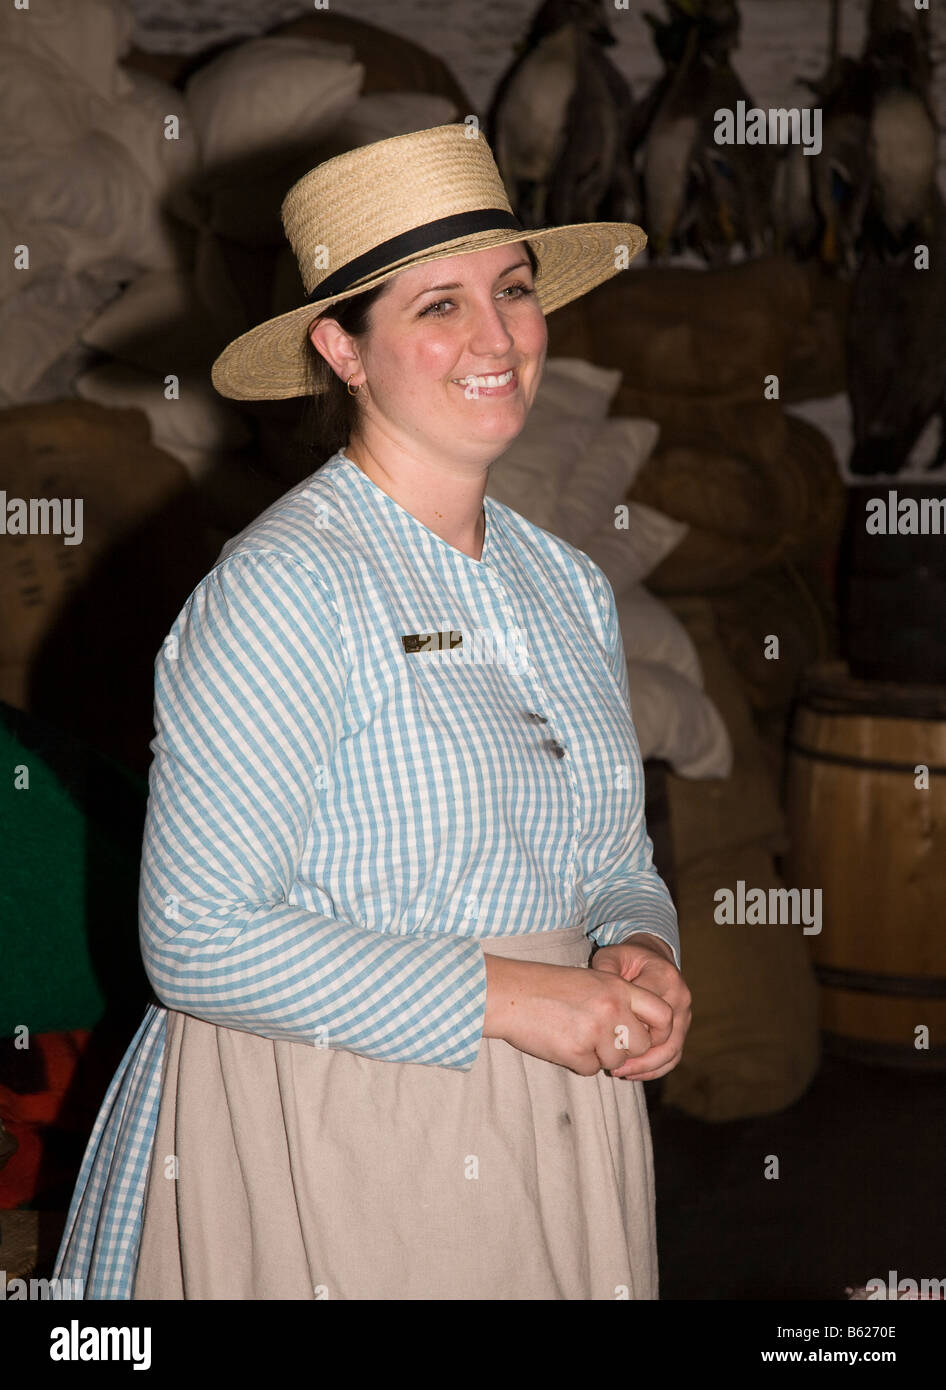 Tour guide in period costume Fort Langley national historic monument Canada Stock Photo